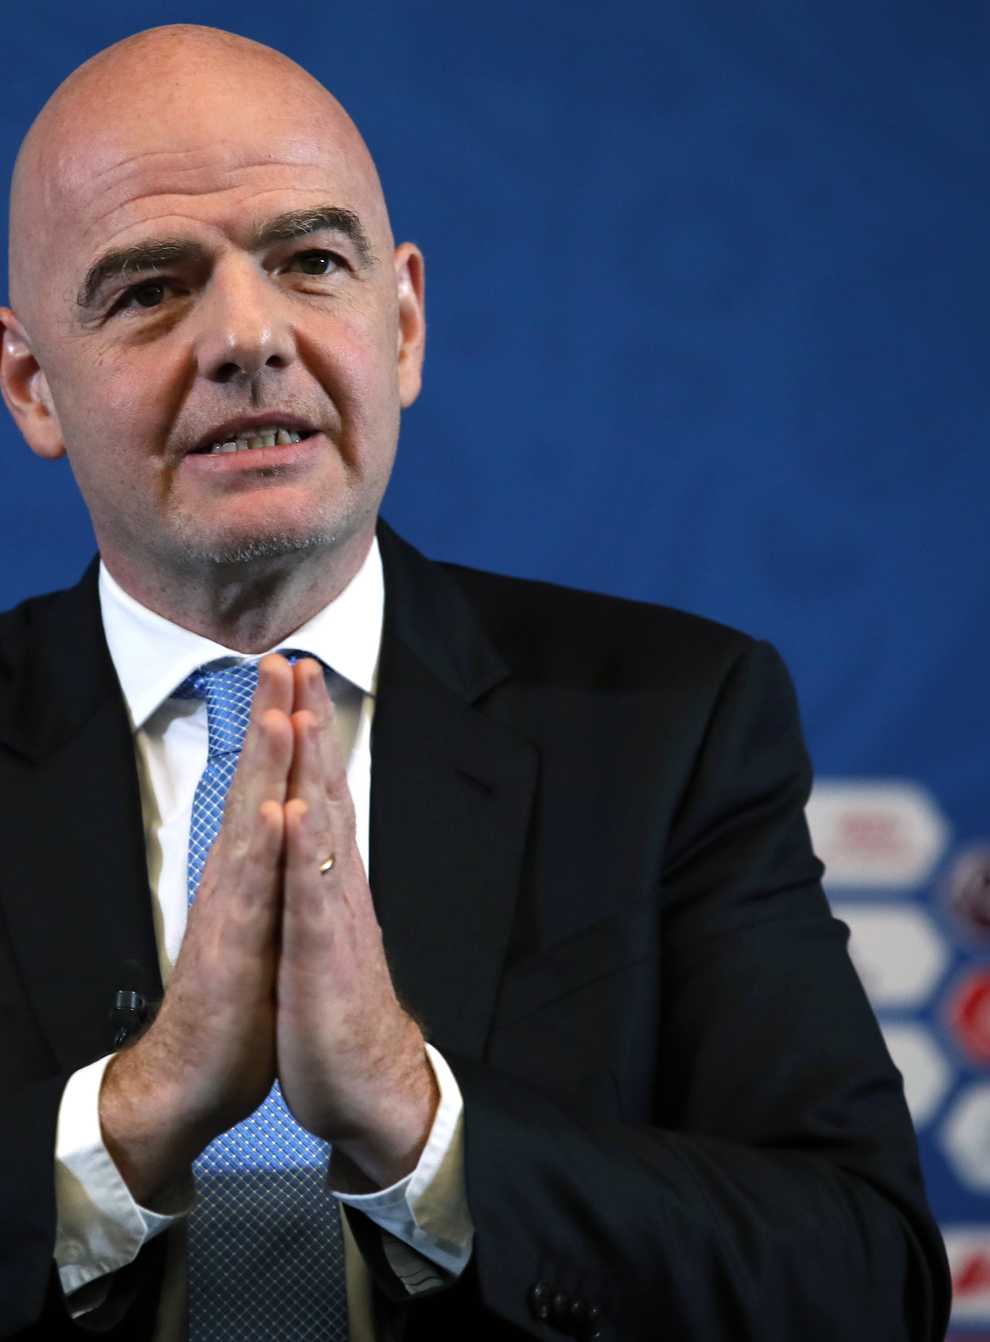 A case file concerning a flight FIFA president Gianni Infantino took in 2017 has been passed to federal prosecutors in Switzerland